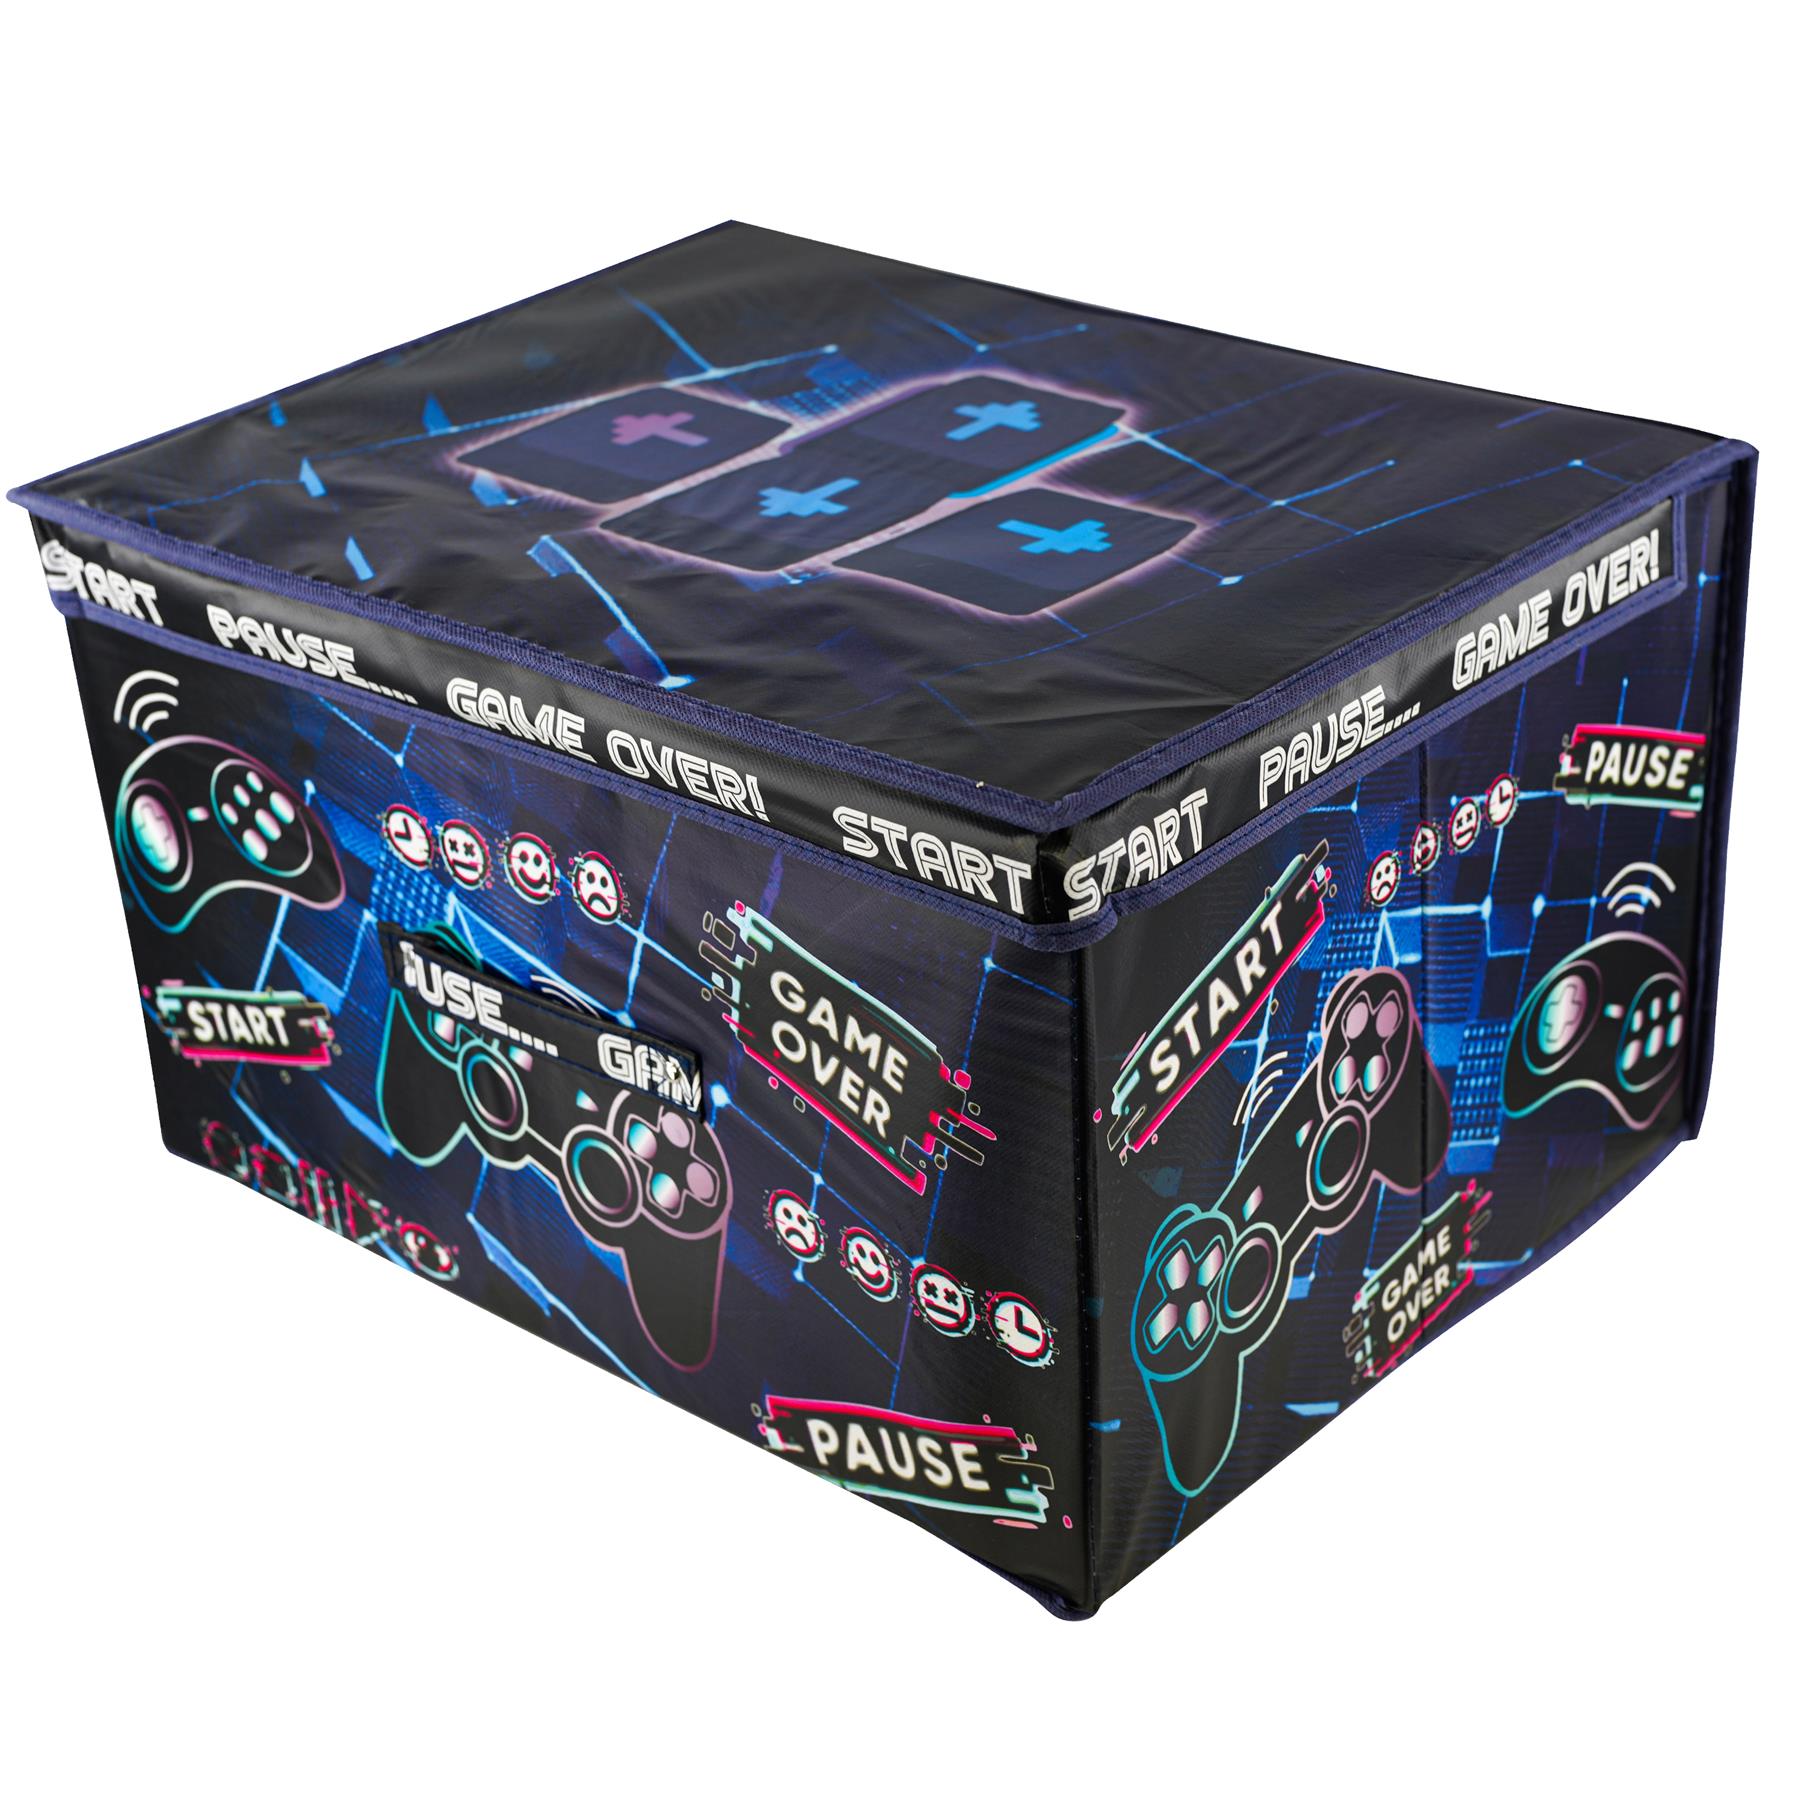 Game Over Storage Box by The Magic Toy Shop - UKBuyZone